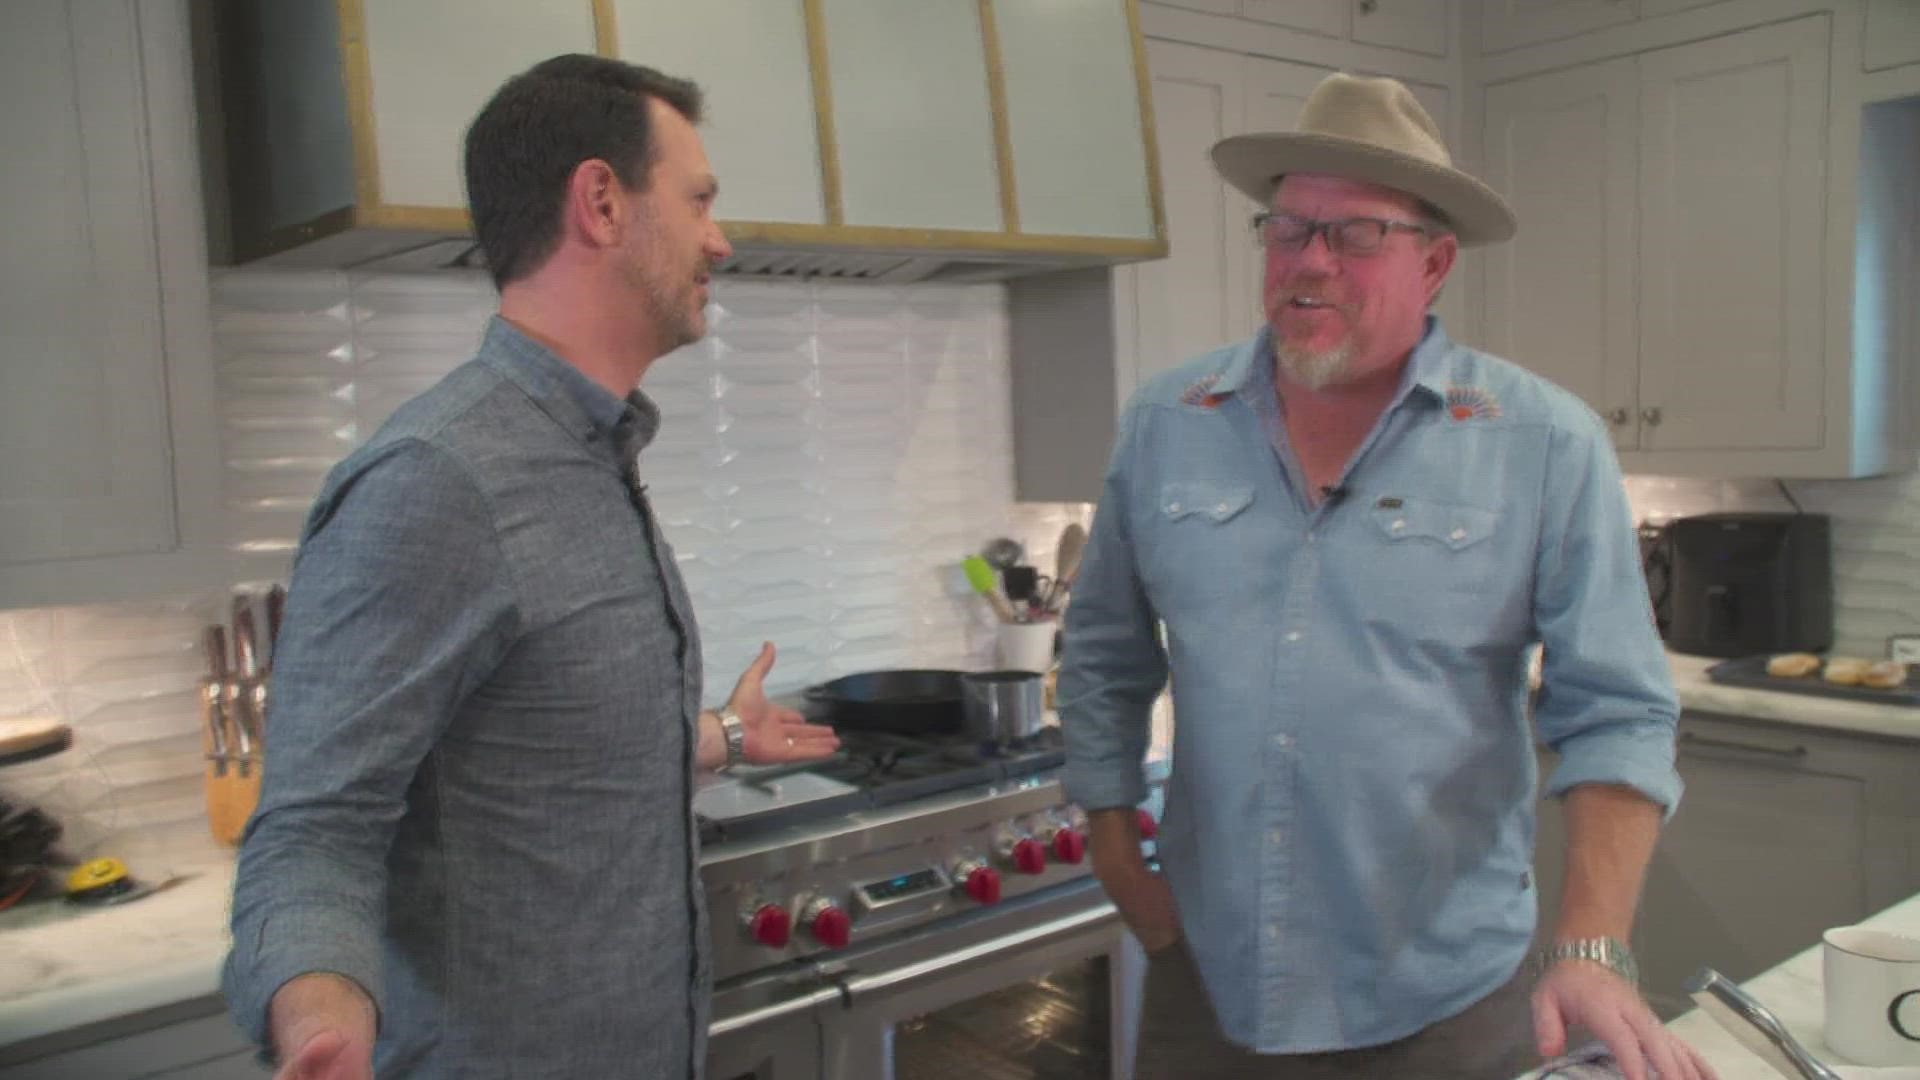 Pat Greene joined Marc Istook to show him some recipes.